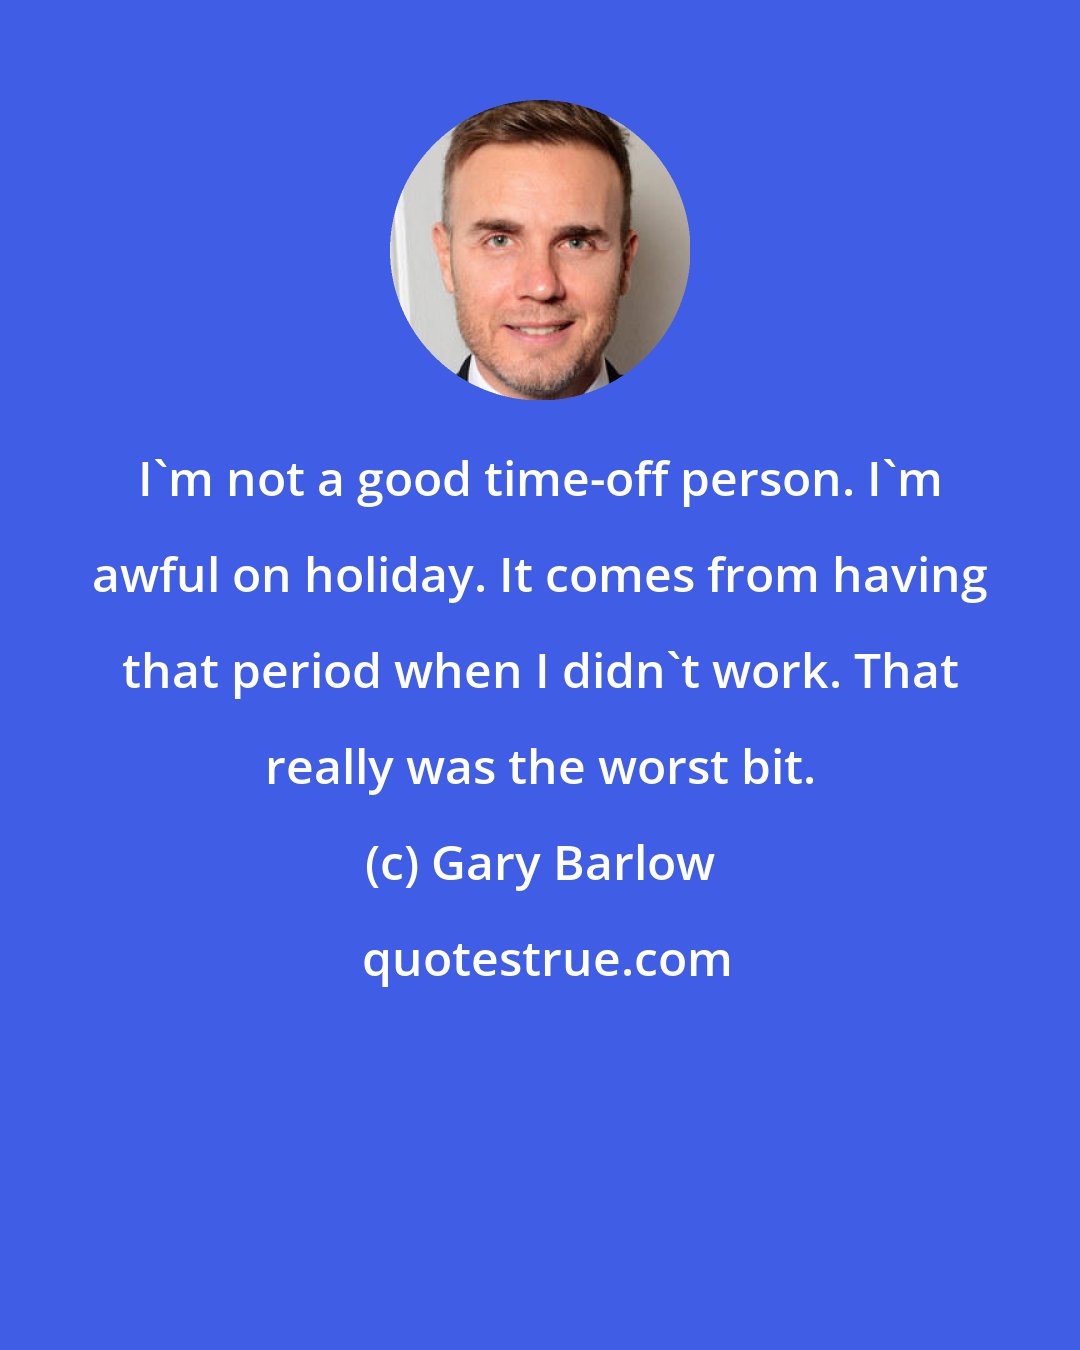 Gary Barlow: I'm not a good time-off person. I'm awful on holiday. It comes from having that period when I didn't work. That really was the worst bit.